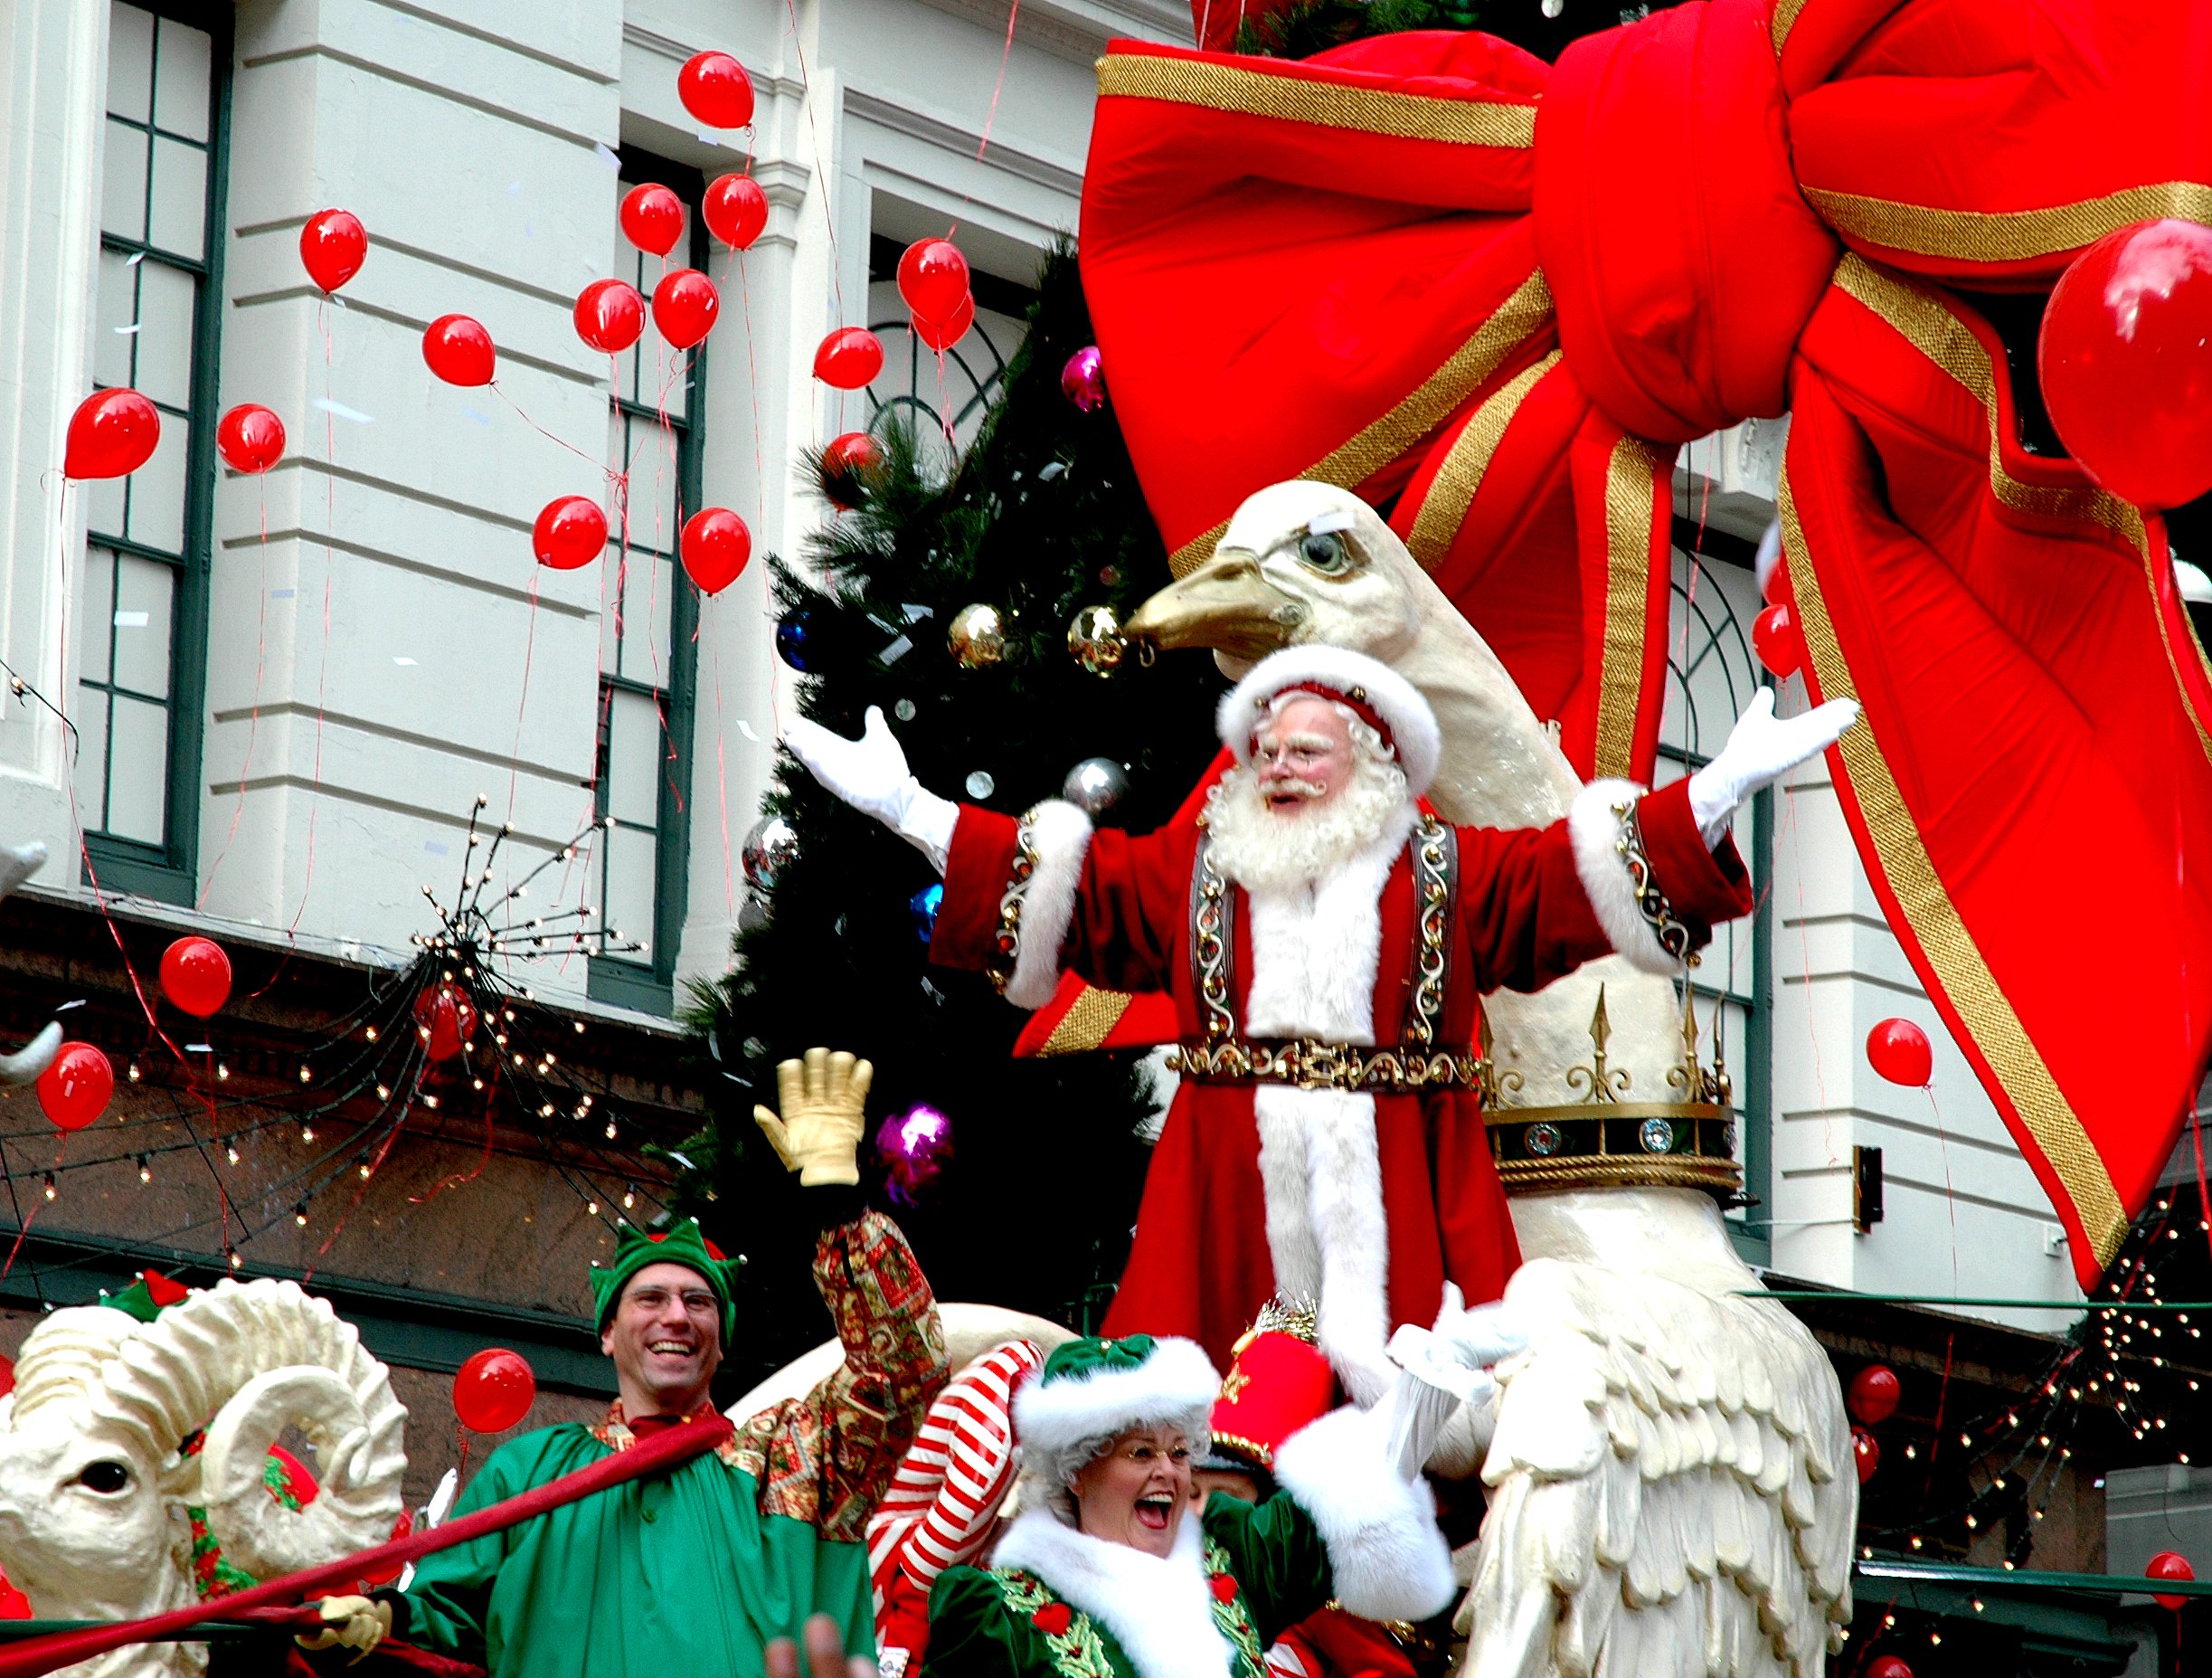 the-macys-parades-biggest-star-the-one-and-only-santa-claus.jpg 